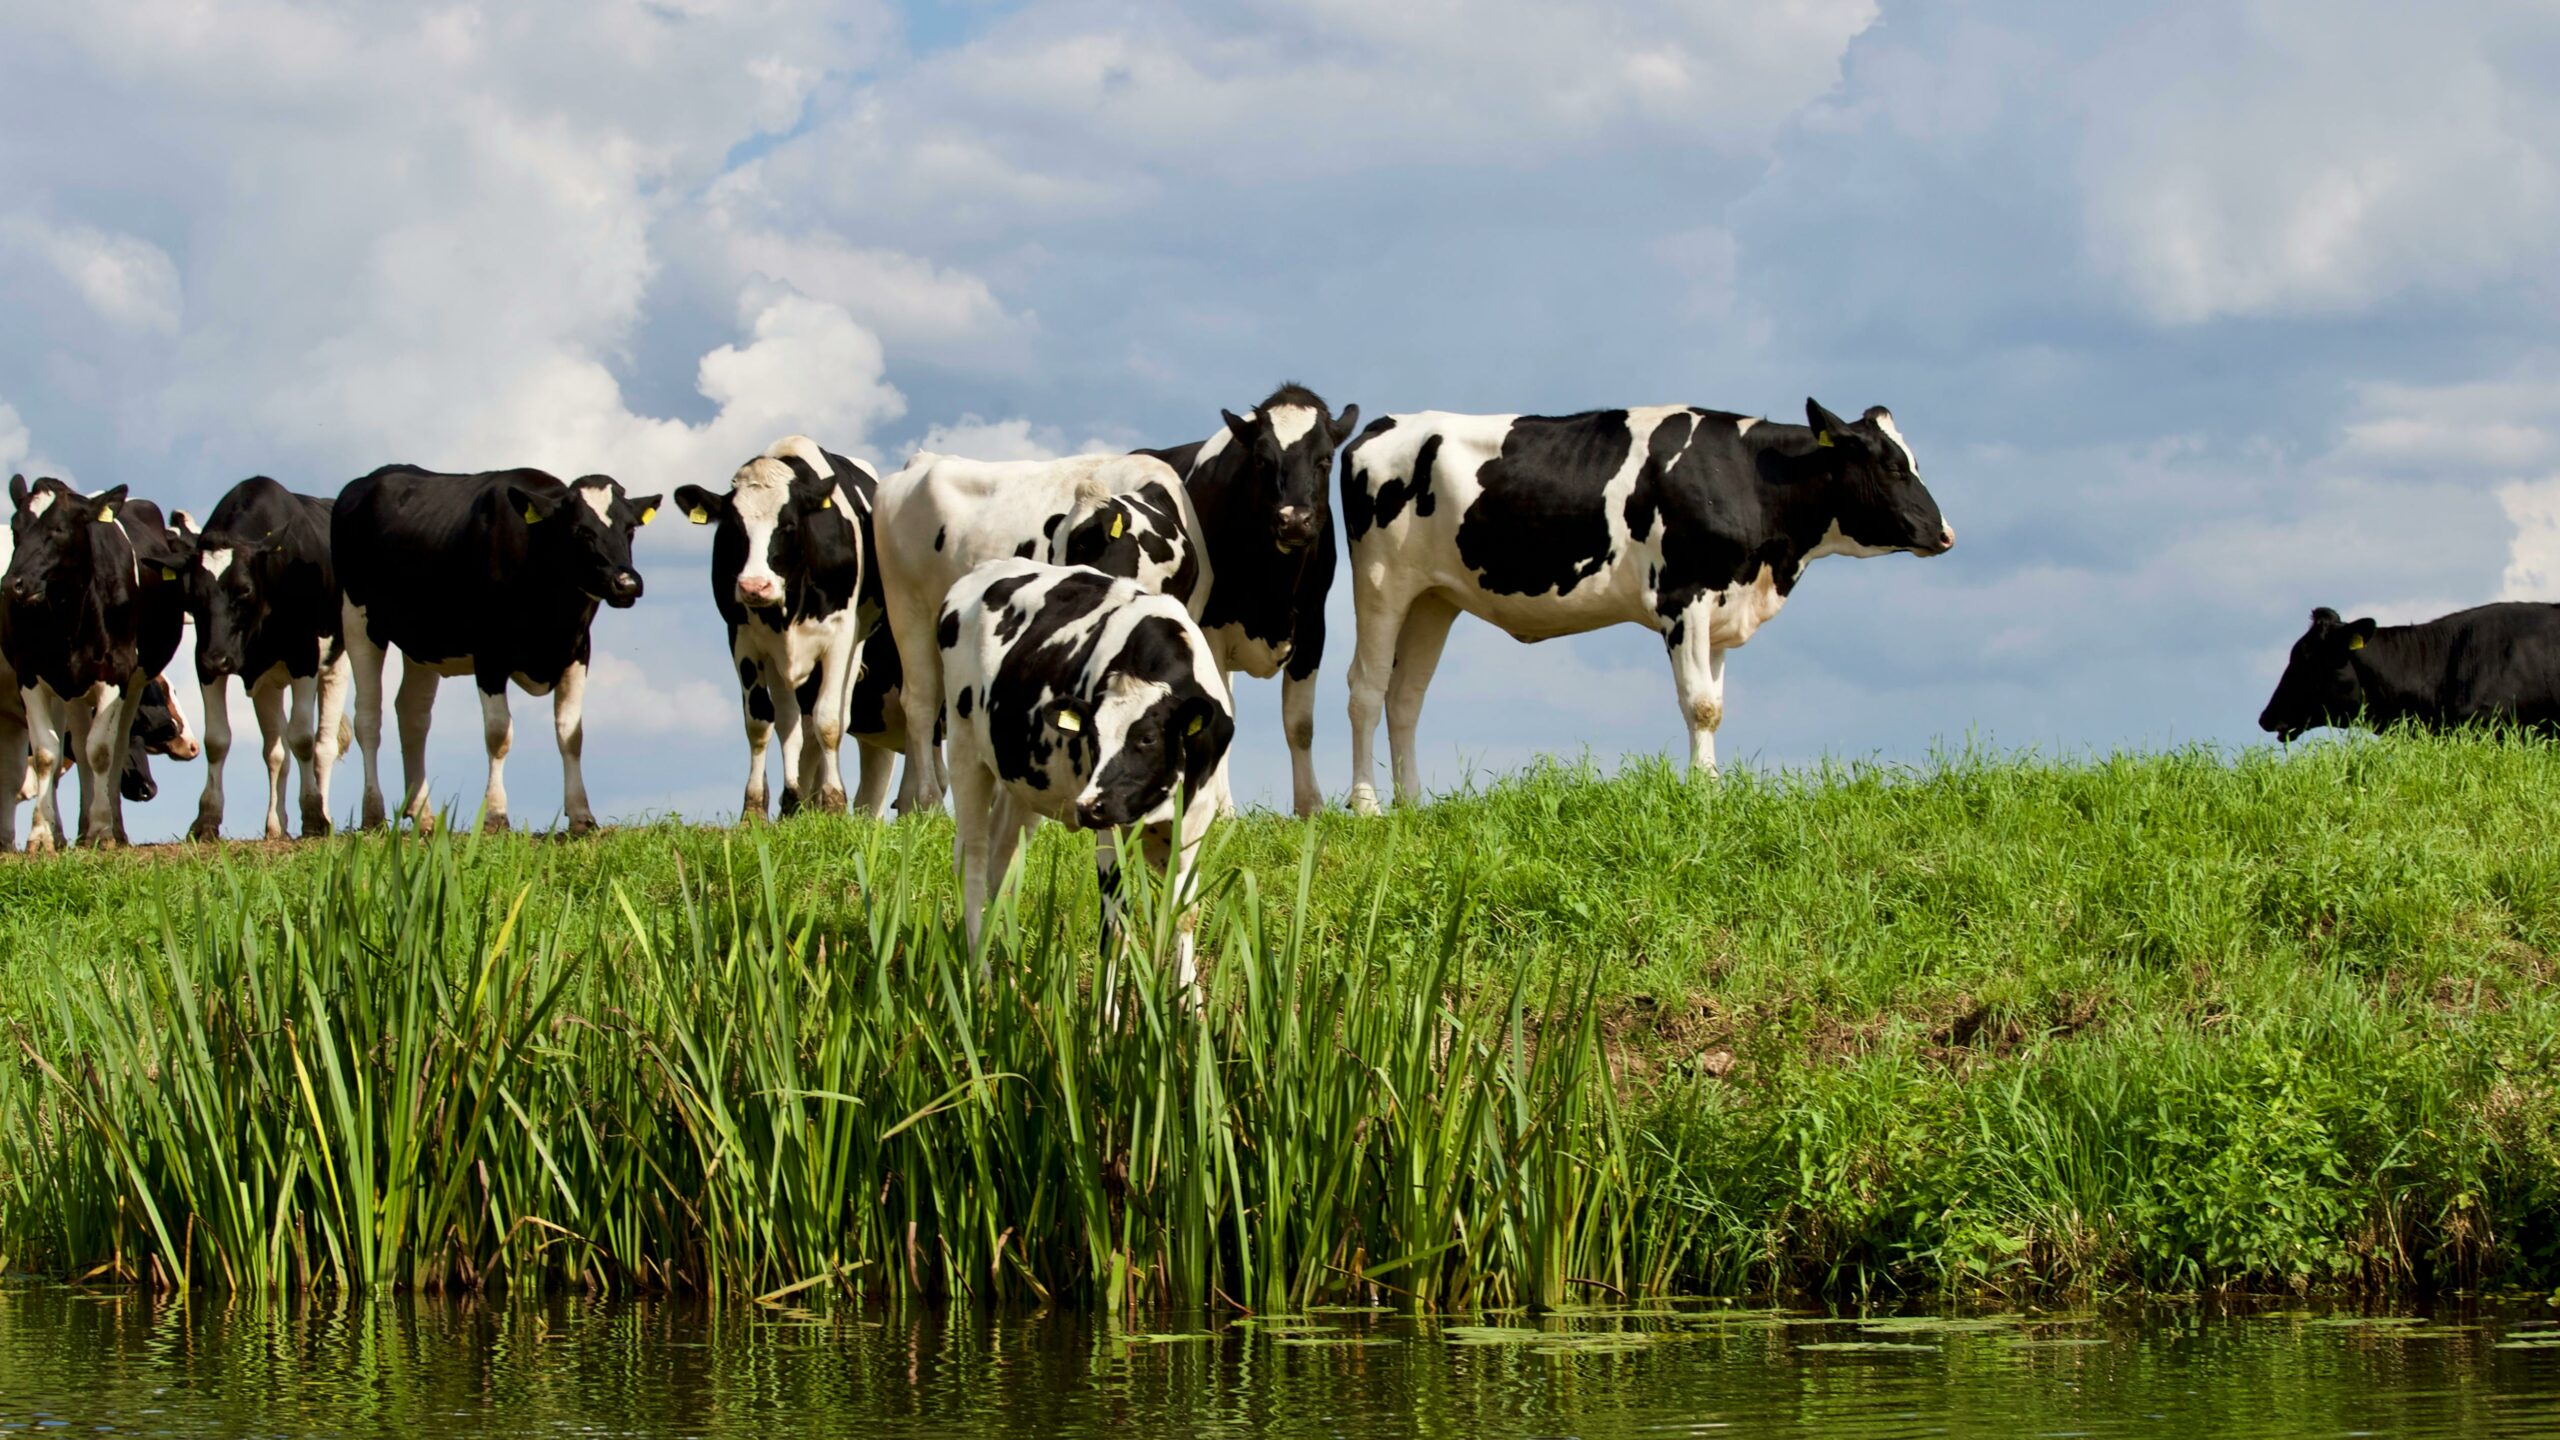 University of Missouri Extension urges biosecurity to mitigate HPAI on dairy farms